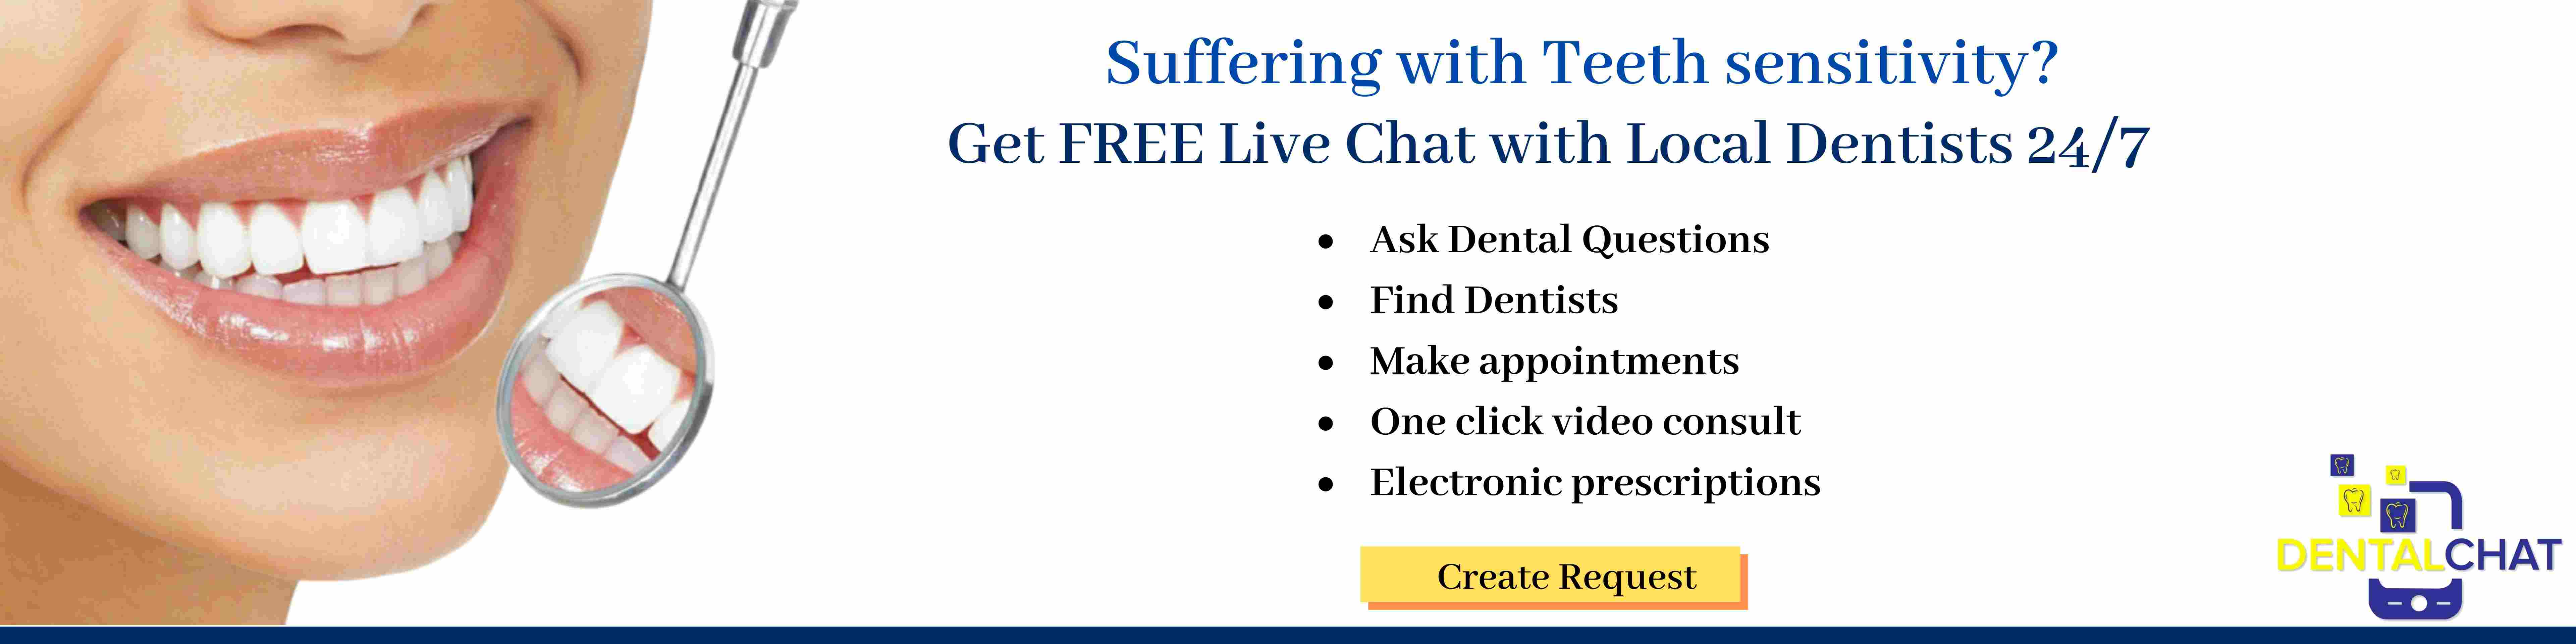 Teledentistry Sensitive Tooth Consult, Symptoms of tooth sensitivity blog and treatment of sensitive teeth blogging online